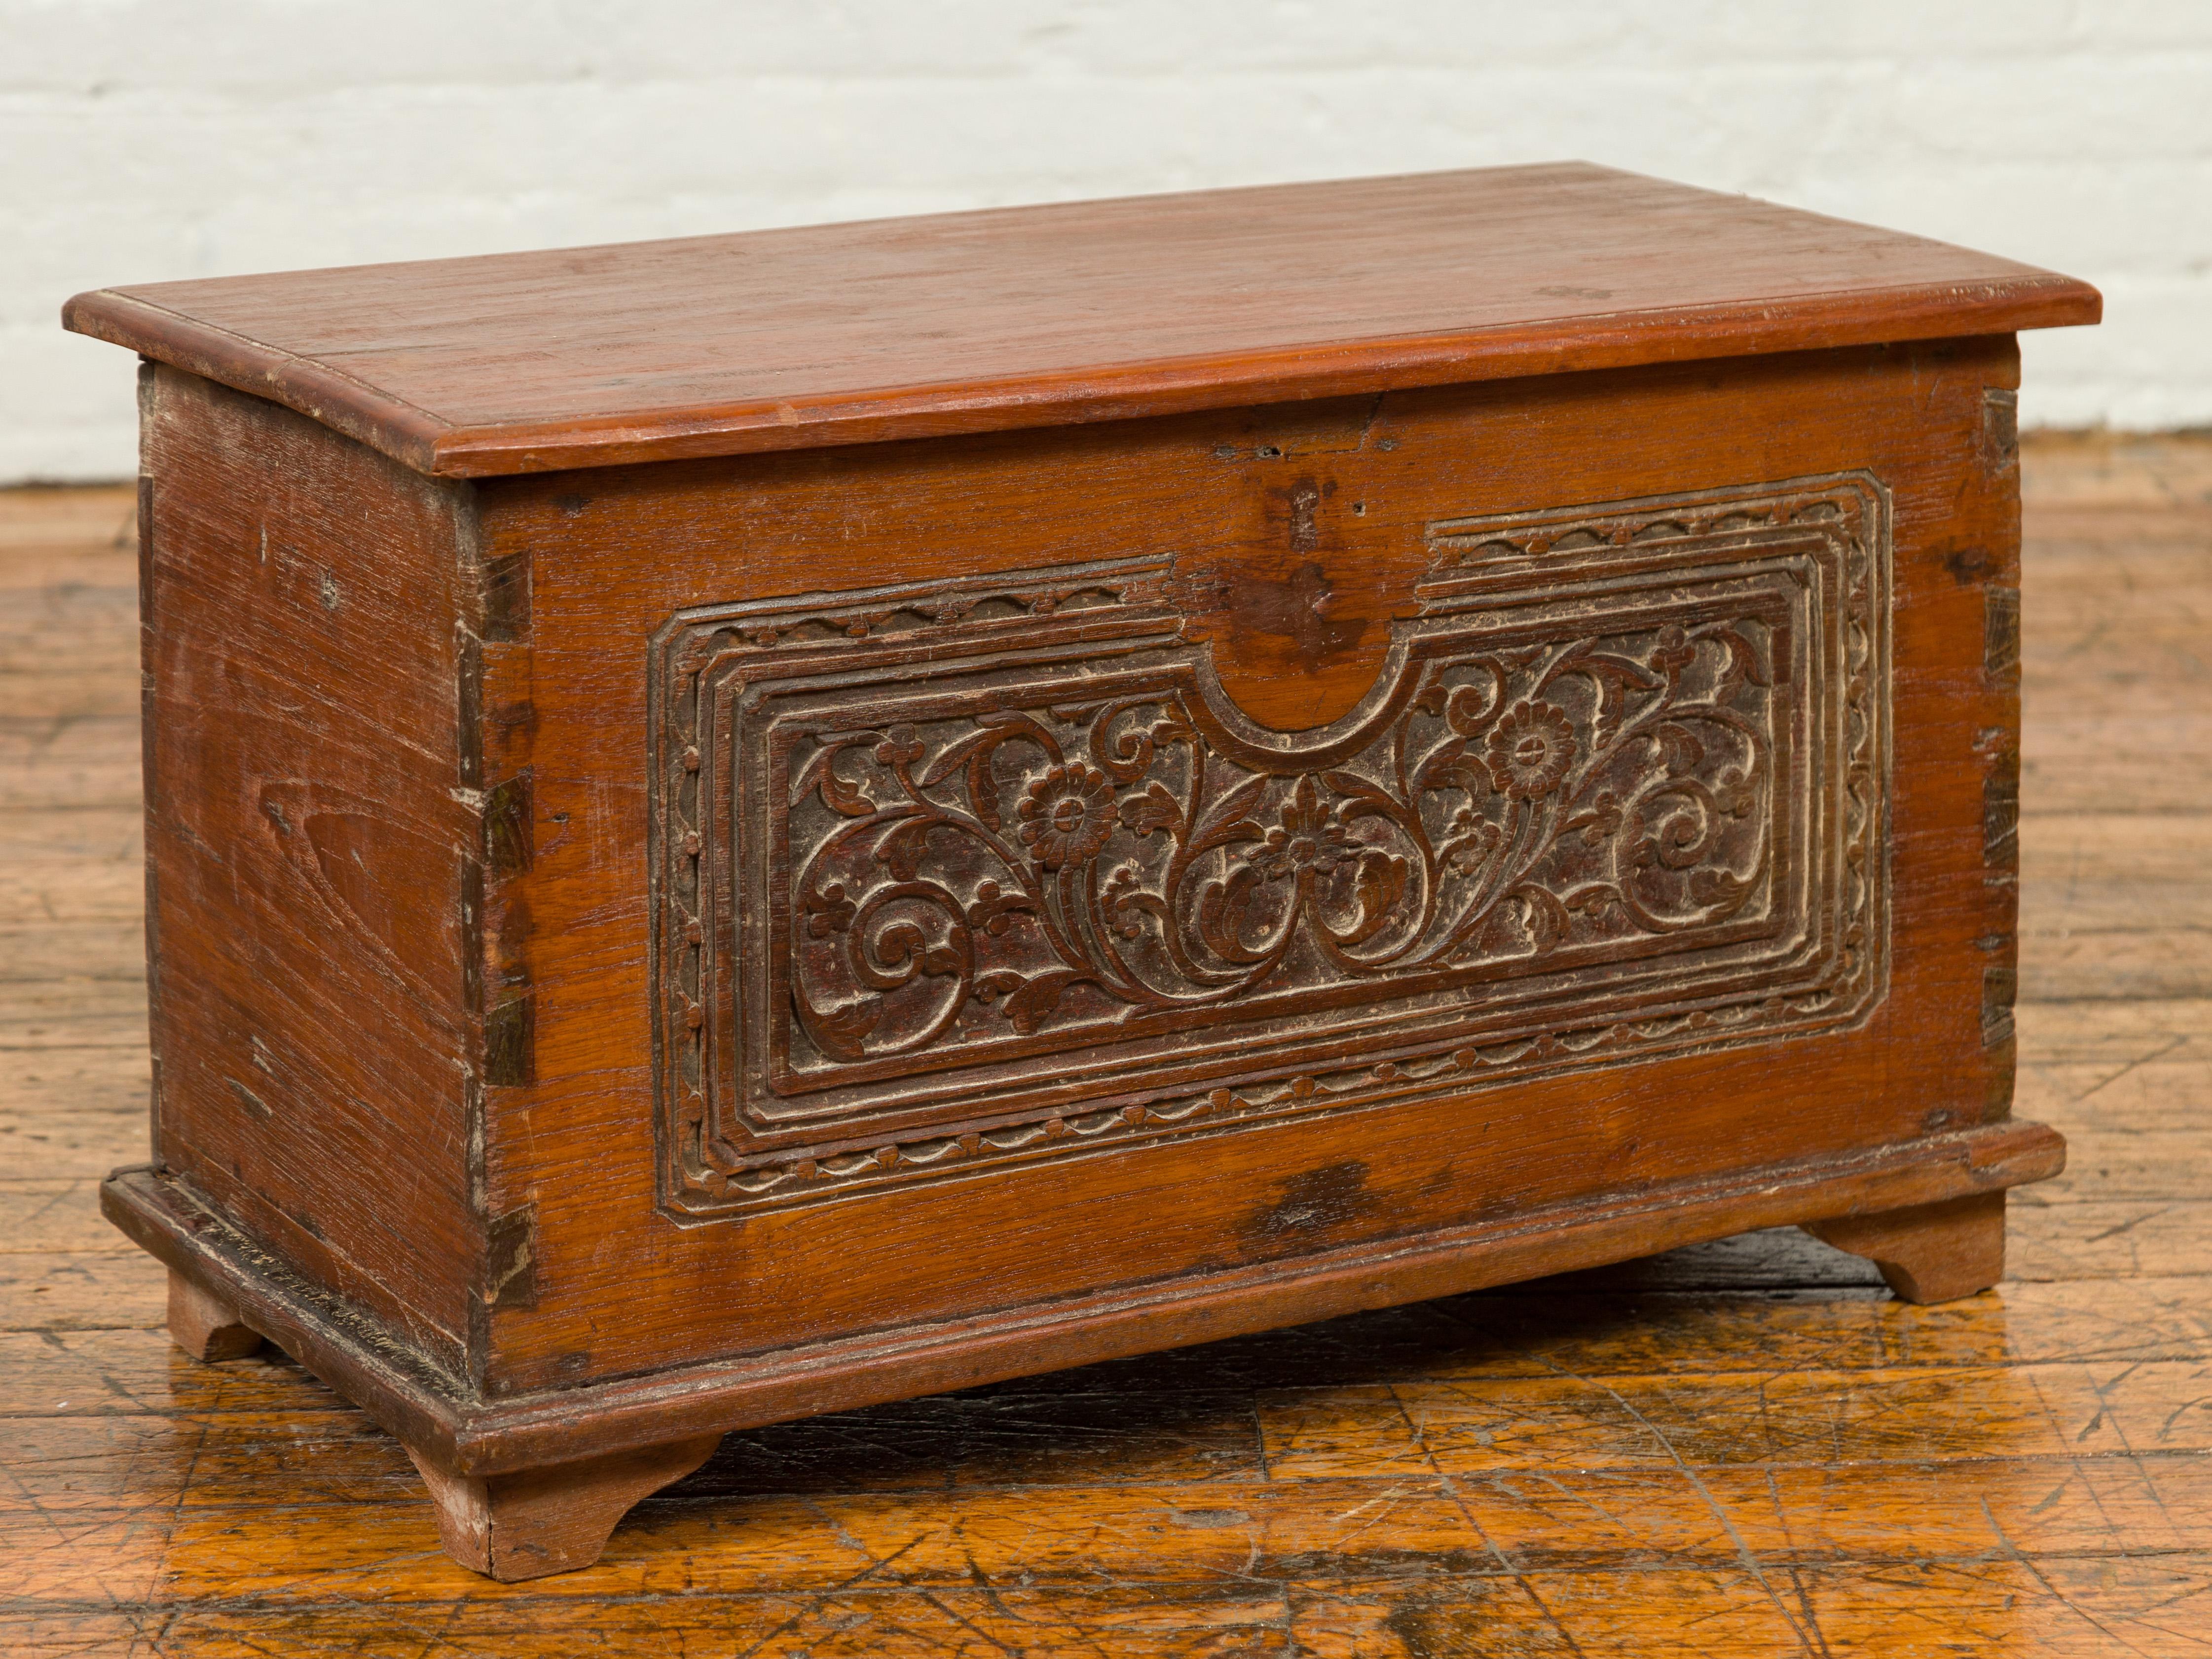 A vintage wooden blanket chest from the mid-20th century, with floral carved front, dovetailed construction and bracket feet. This mid-20th-century wooden blanket chest marries functionality with artistry, making it a versatile addition to any home